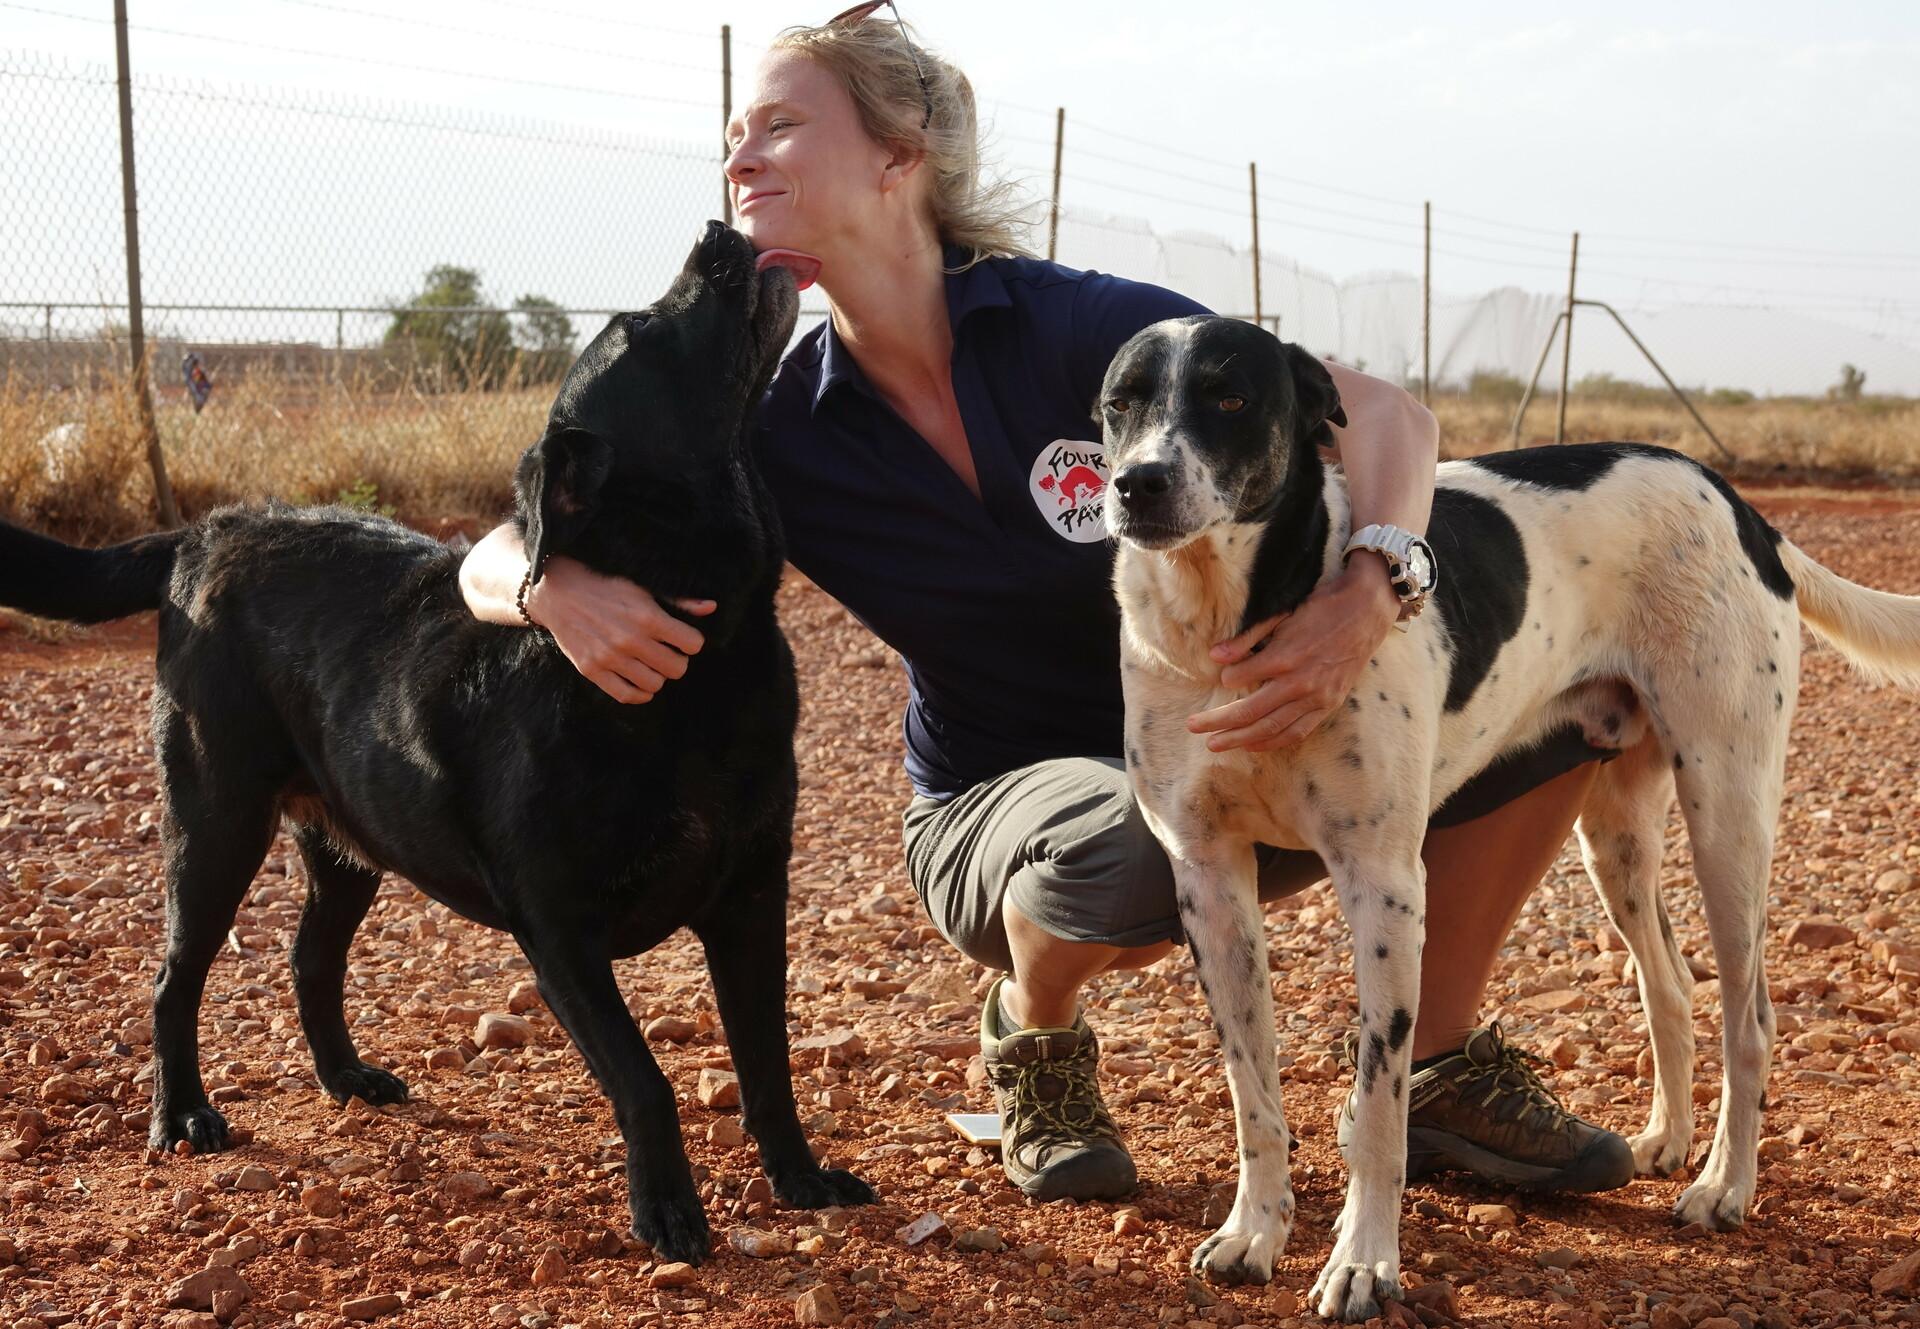 Stray Animal Care in Australia - FOUR PAWS in US - Global Animal Protection  Organization